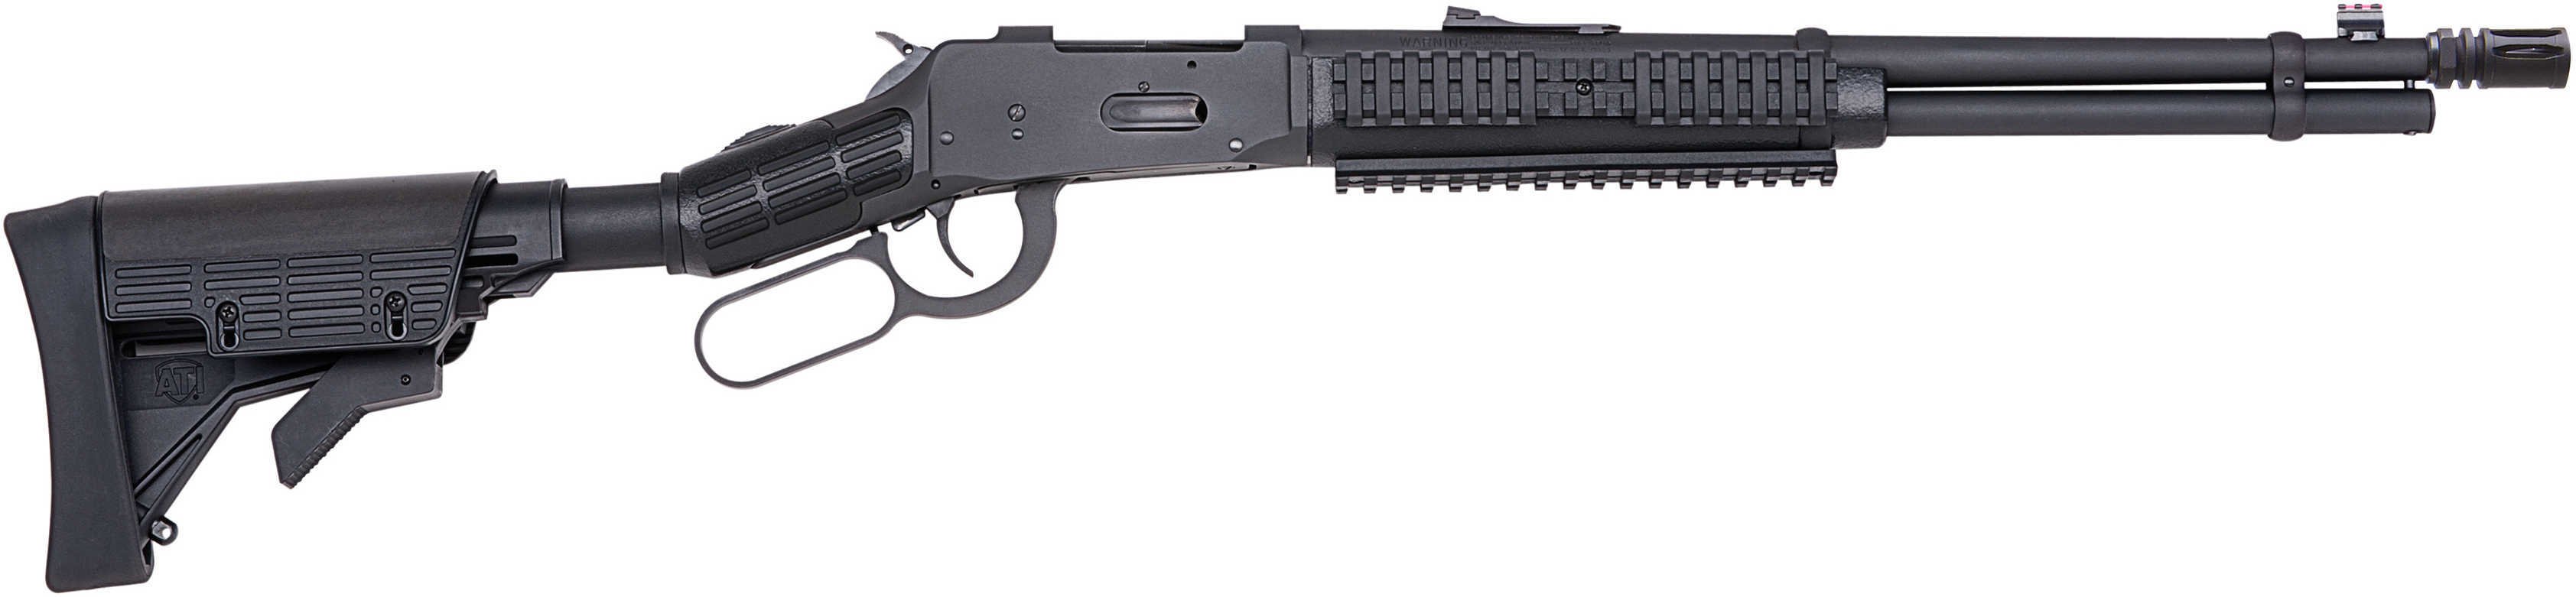 Mossberg 464 SPX Lever Action Rifle 30-30 Winchester Blued Adjustable Stock Flash Suppressor 5 Round 41026